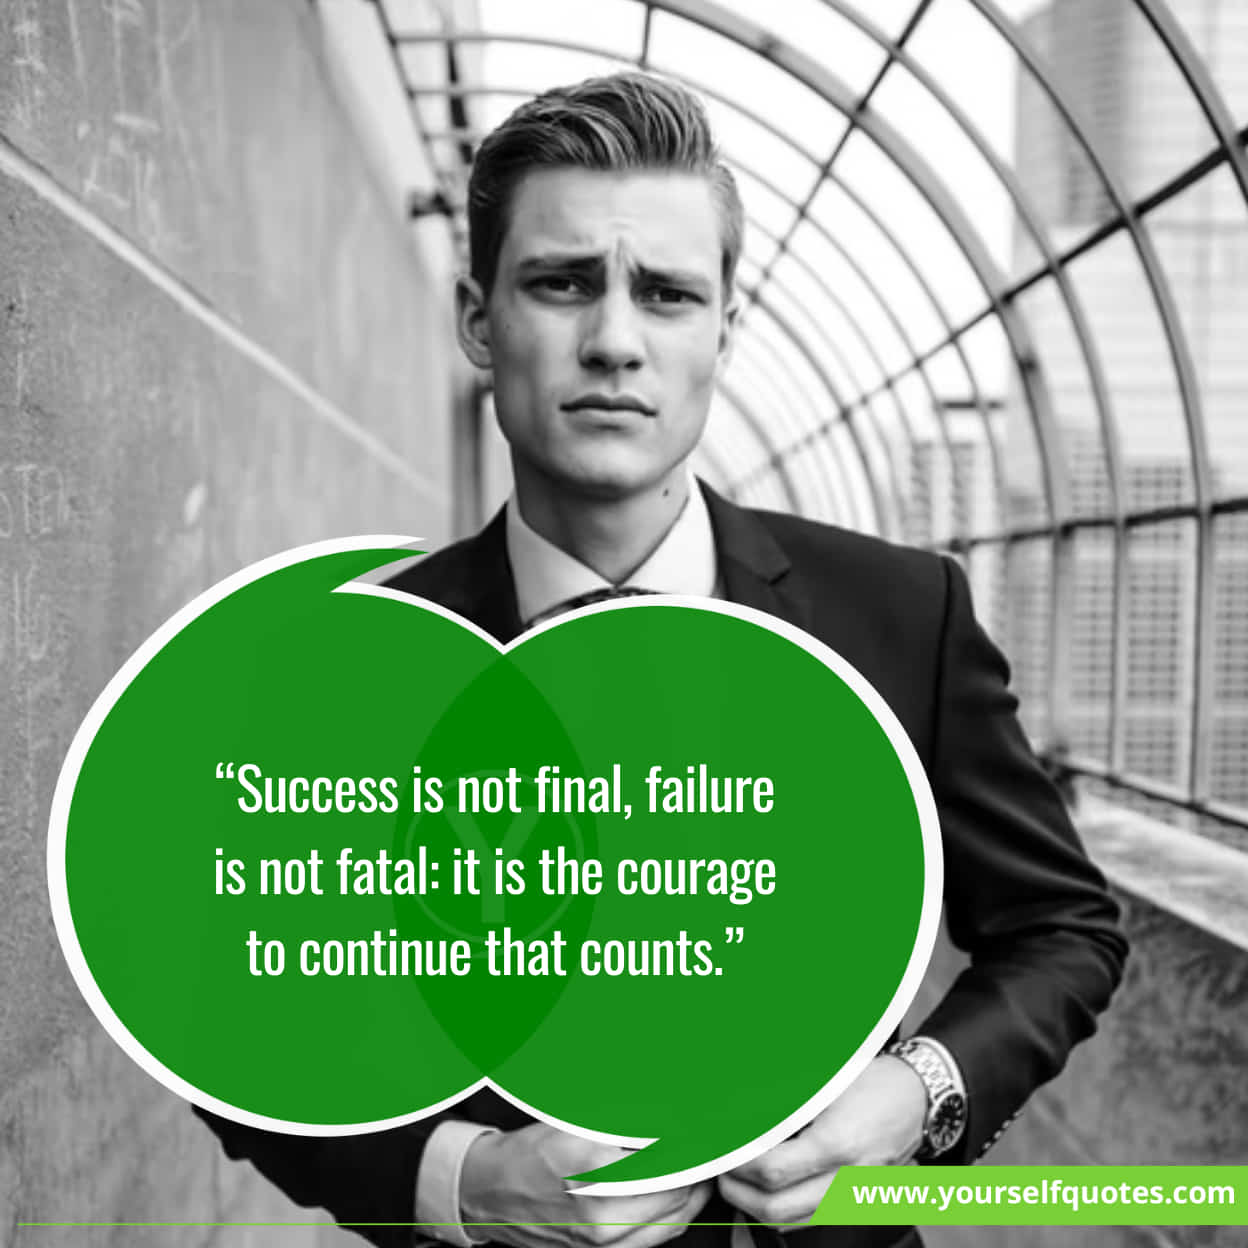 Best Quote Of The Day On Success